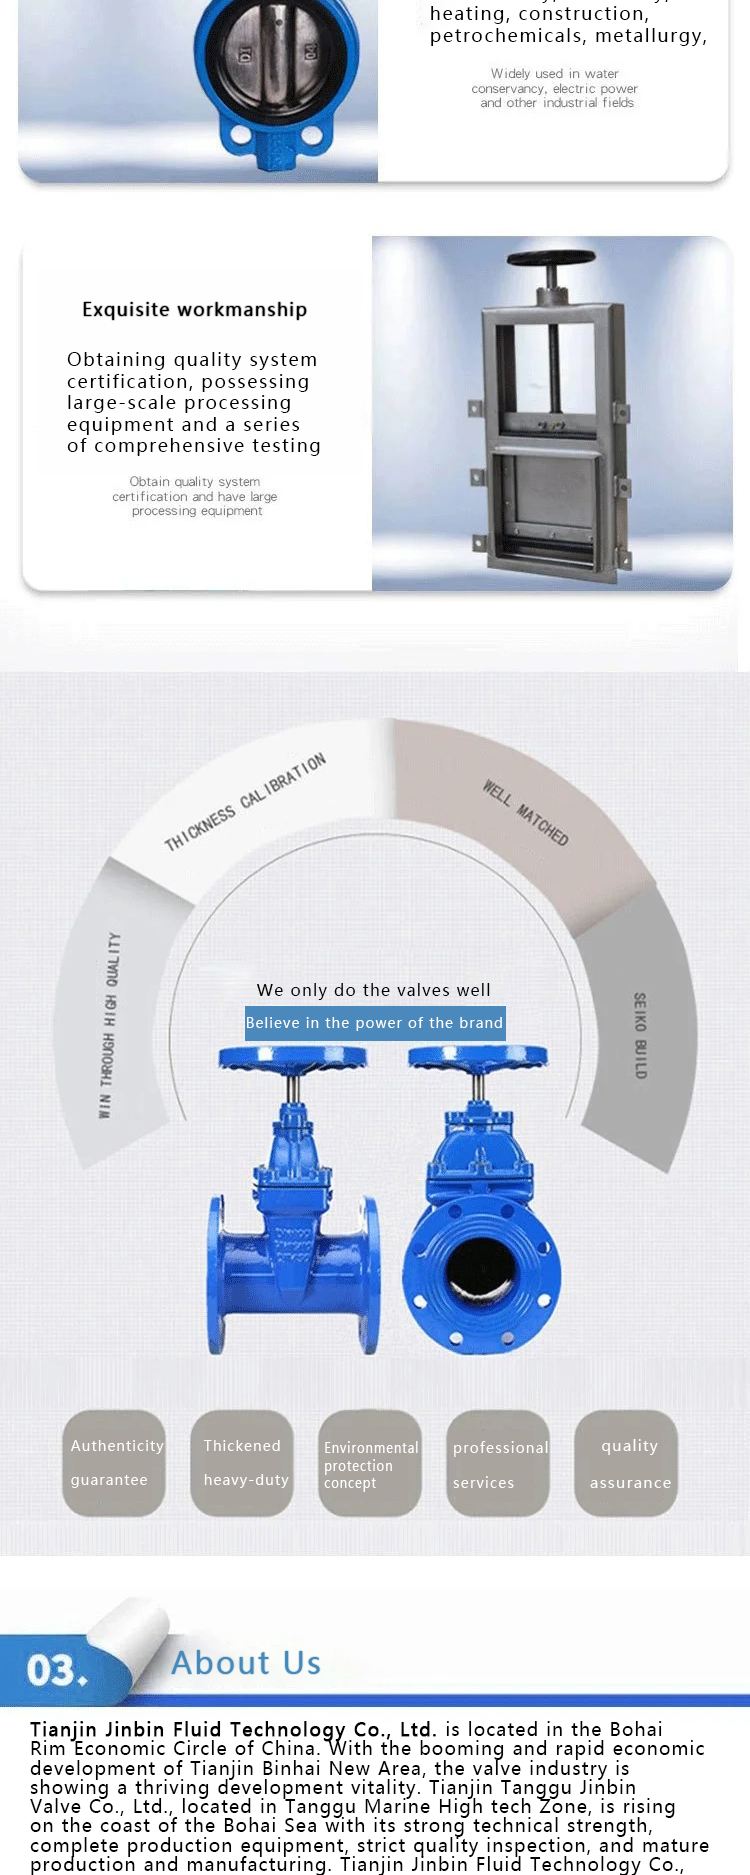 The flange centerline butterfly valve has good sealing performance, and the turbine handle has complete specifications